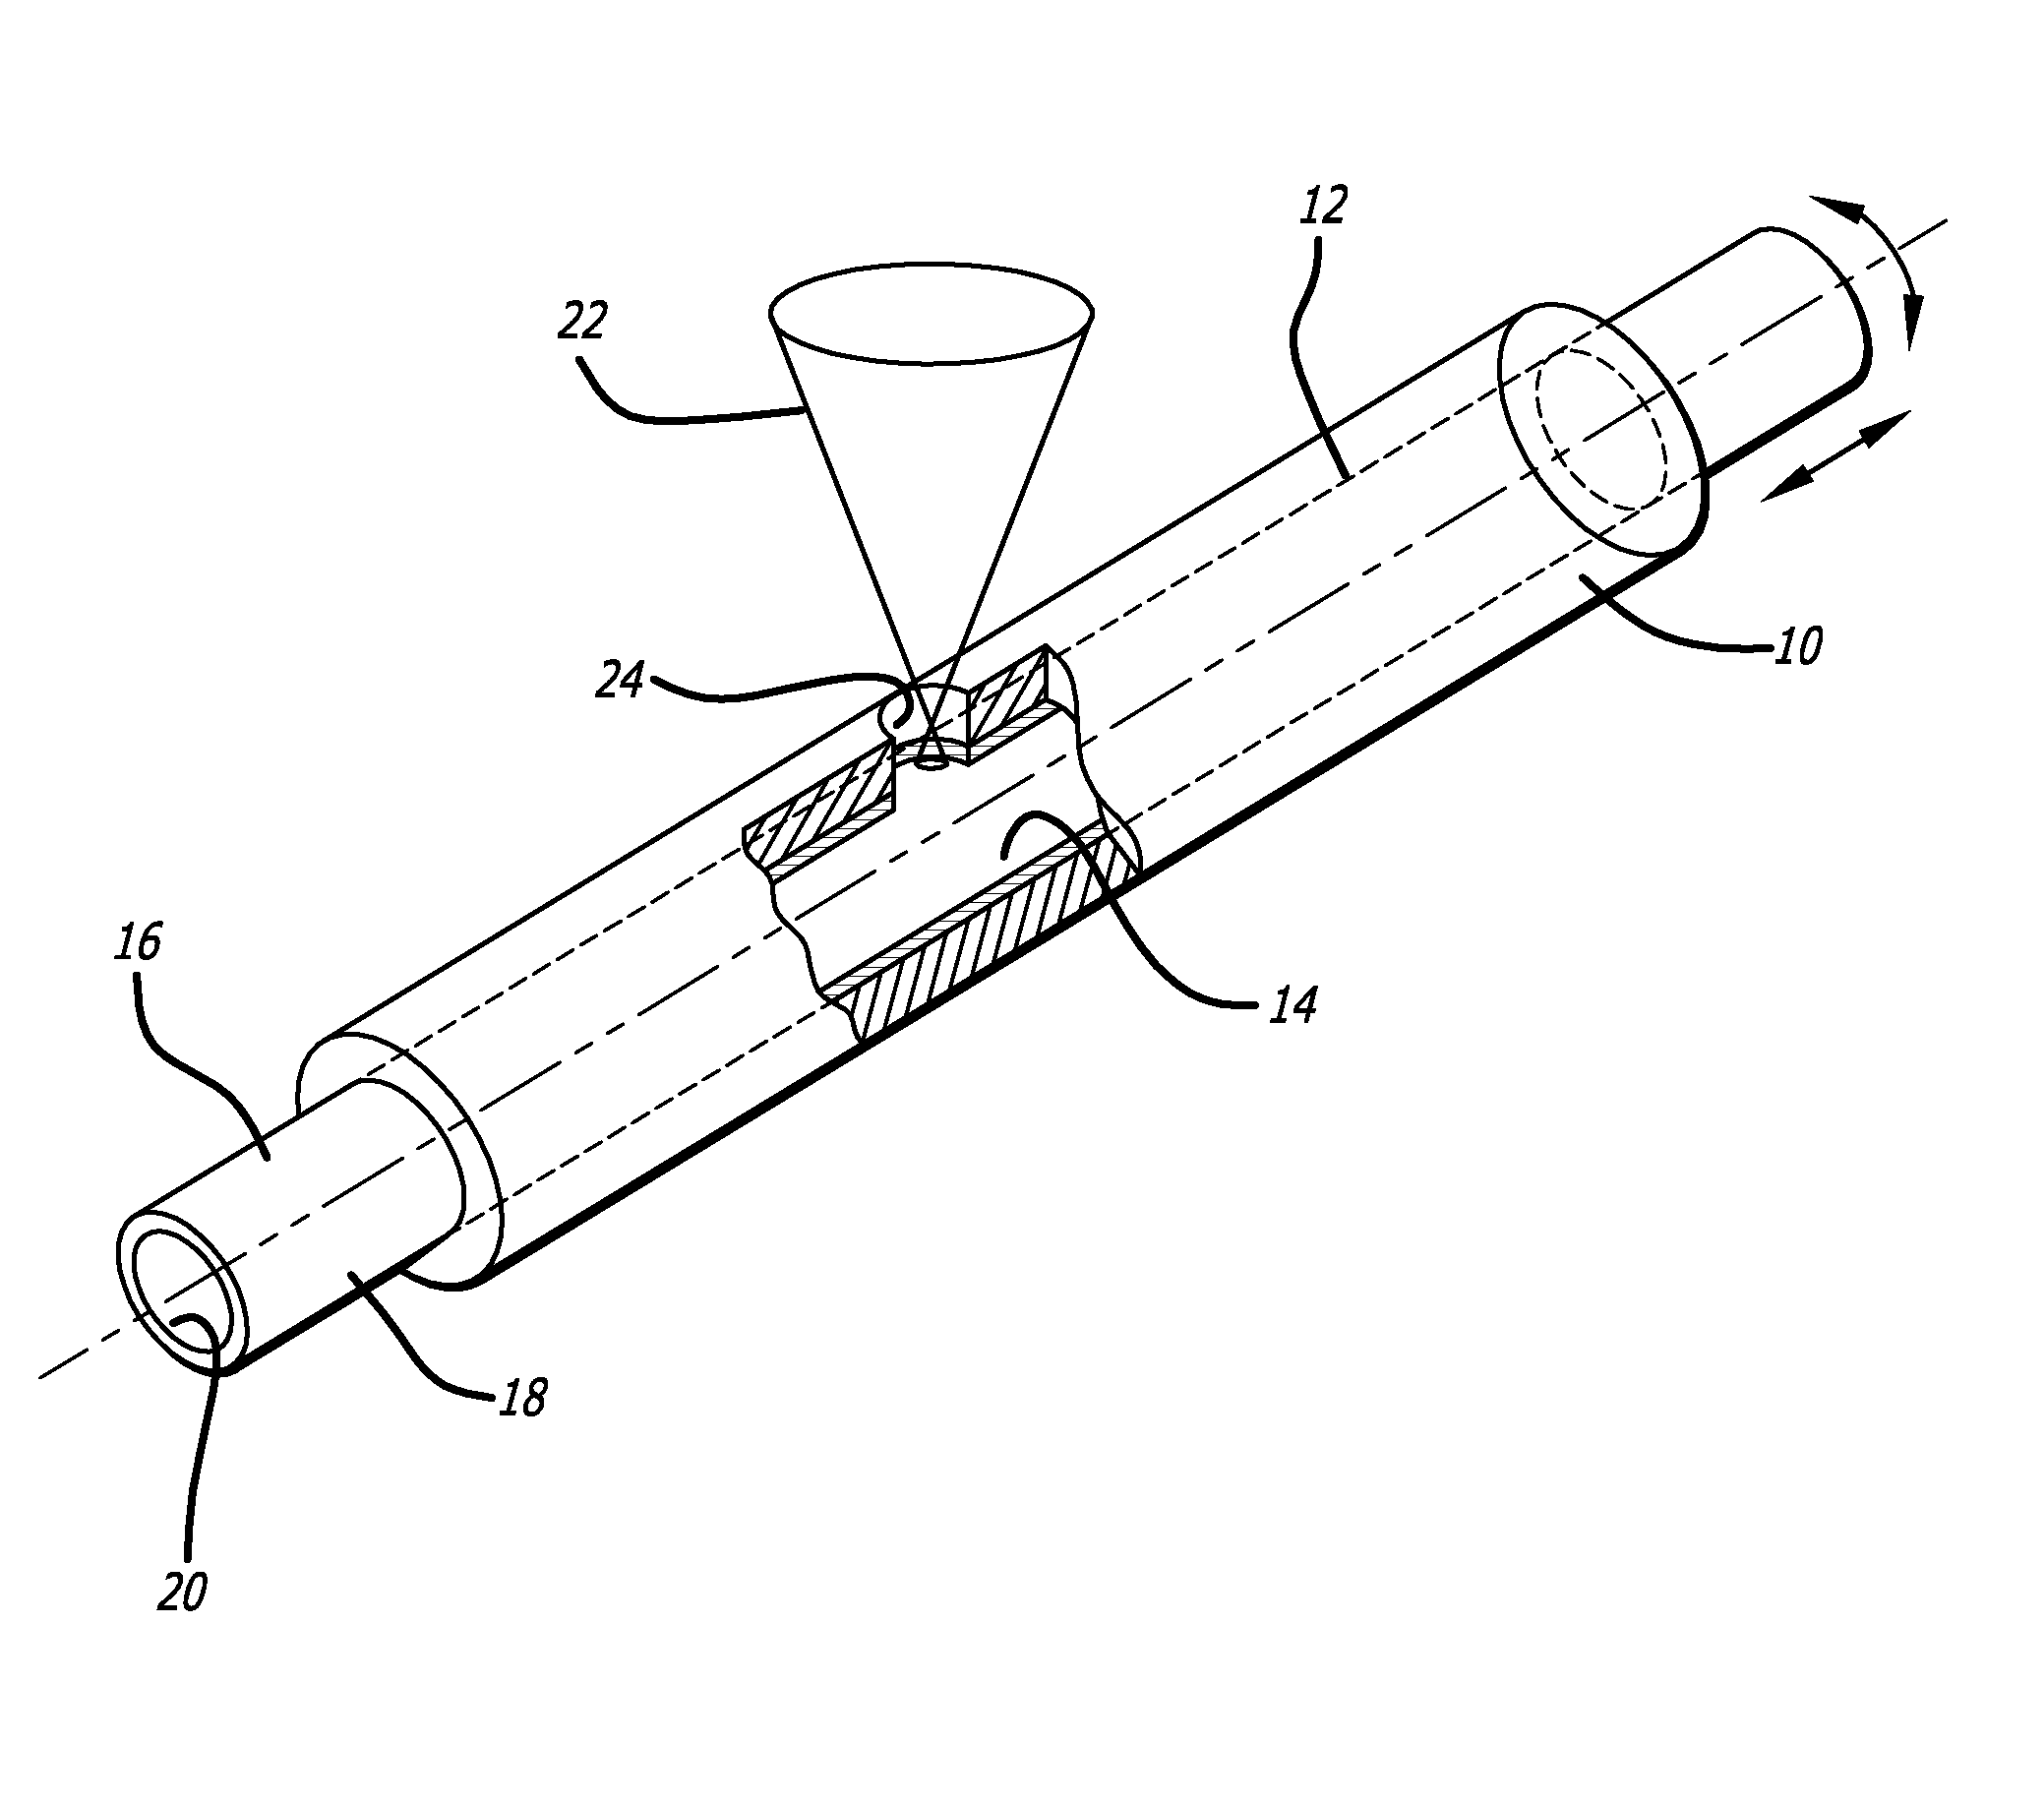 Methods for laser cutting and processing tubing to make medical devices